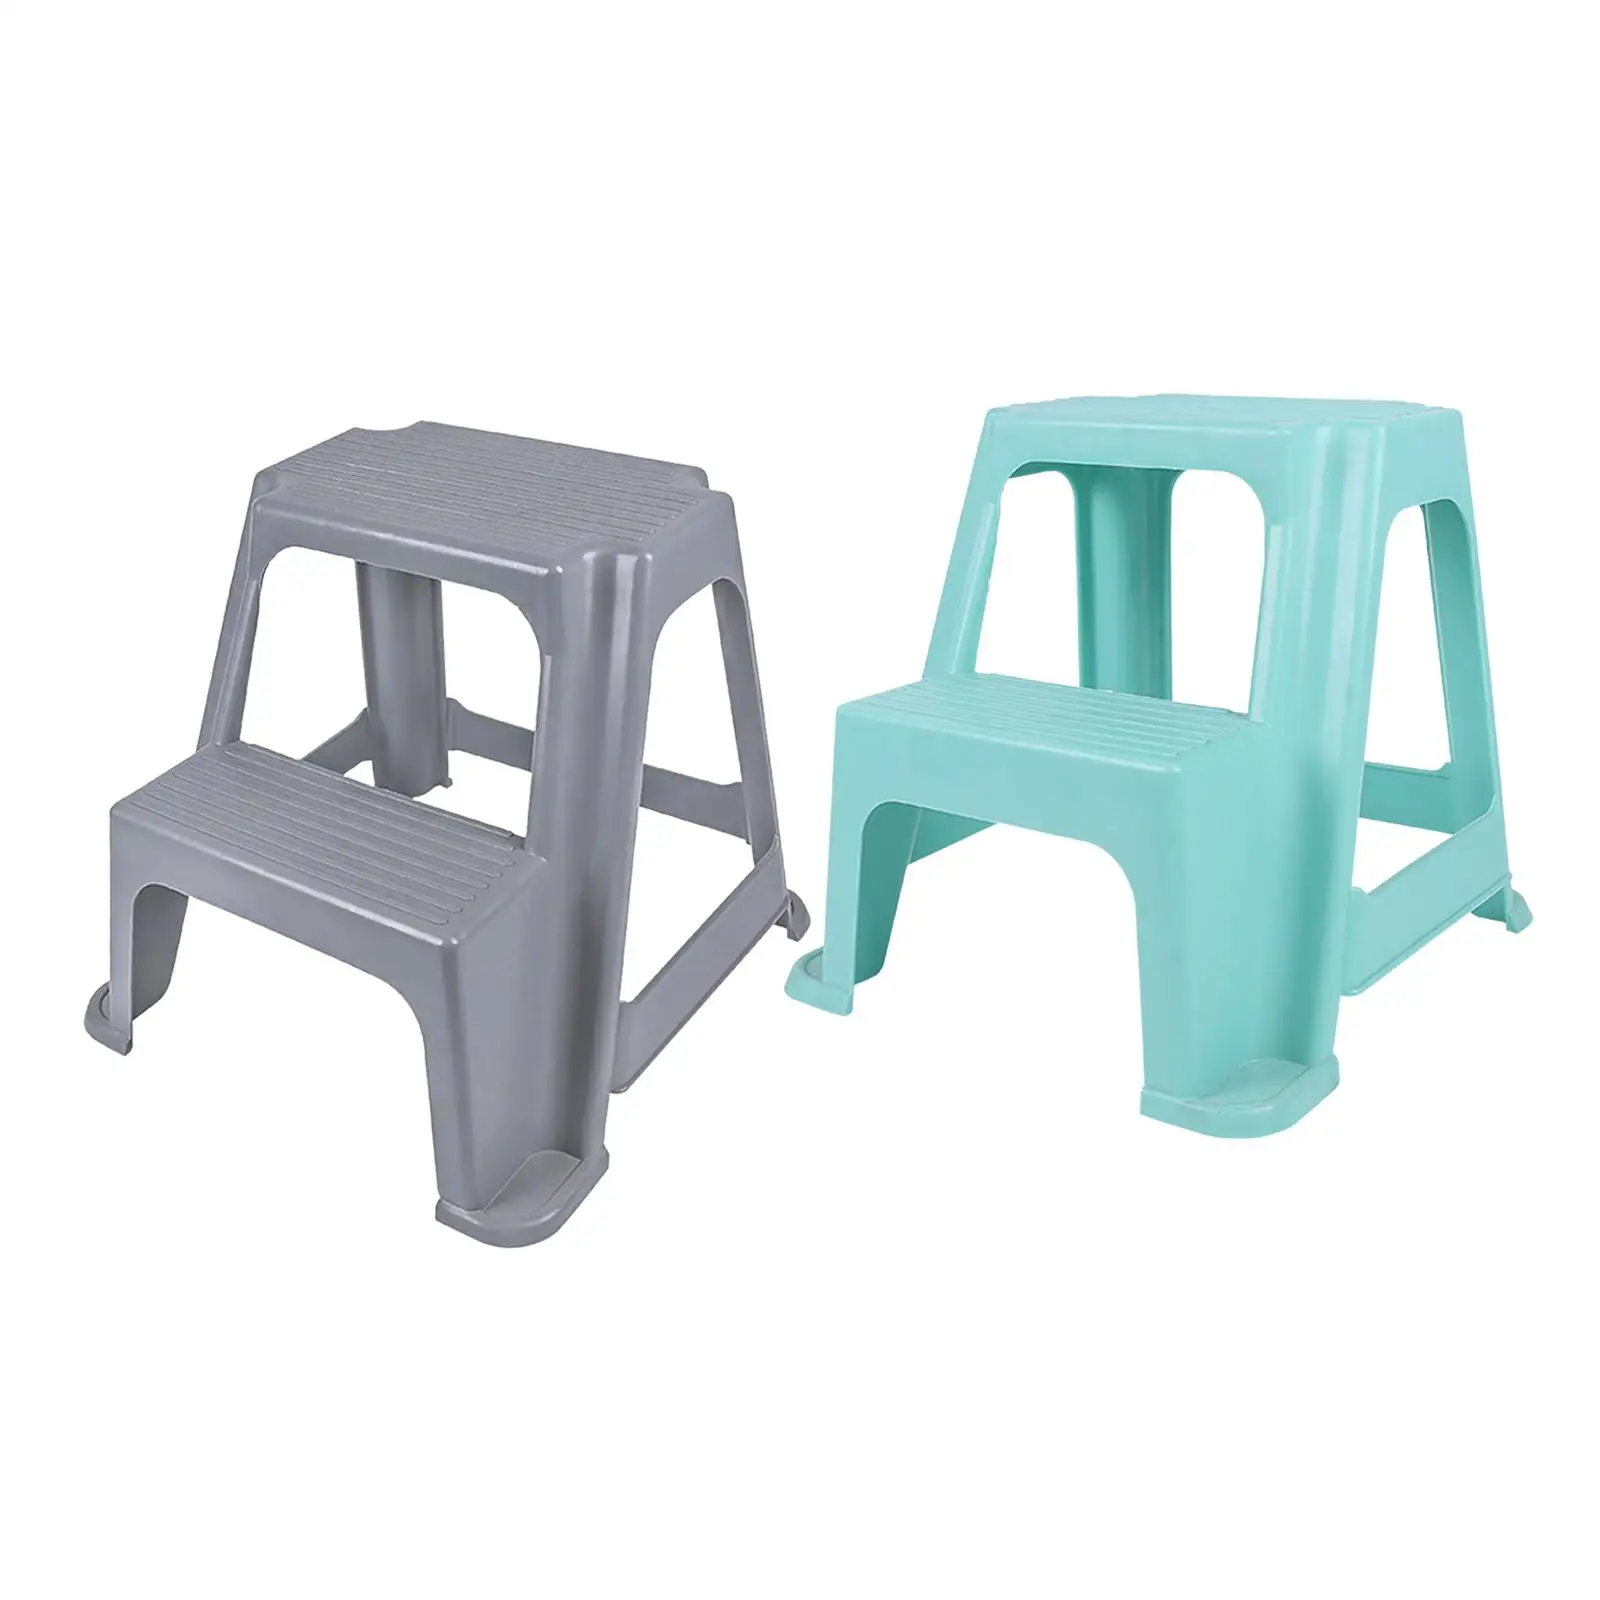 2 Step Stool Portable Footstool Bedside Step Stool Stepping Stool Two Step Stool for Kids Adults Pets Elderly Potty Training